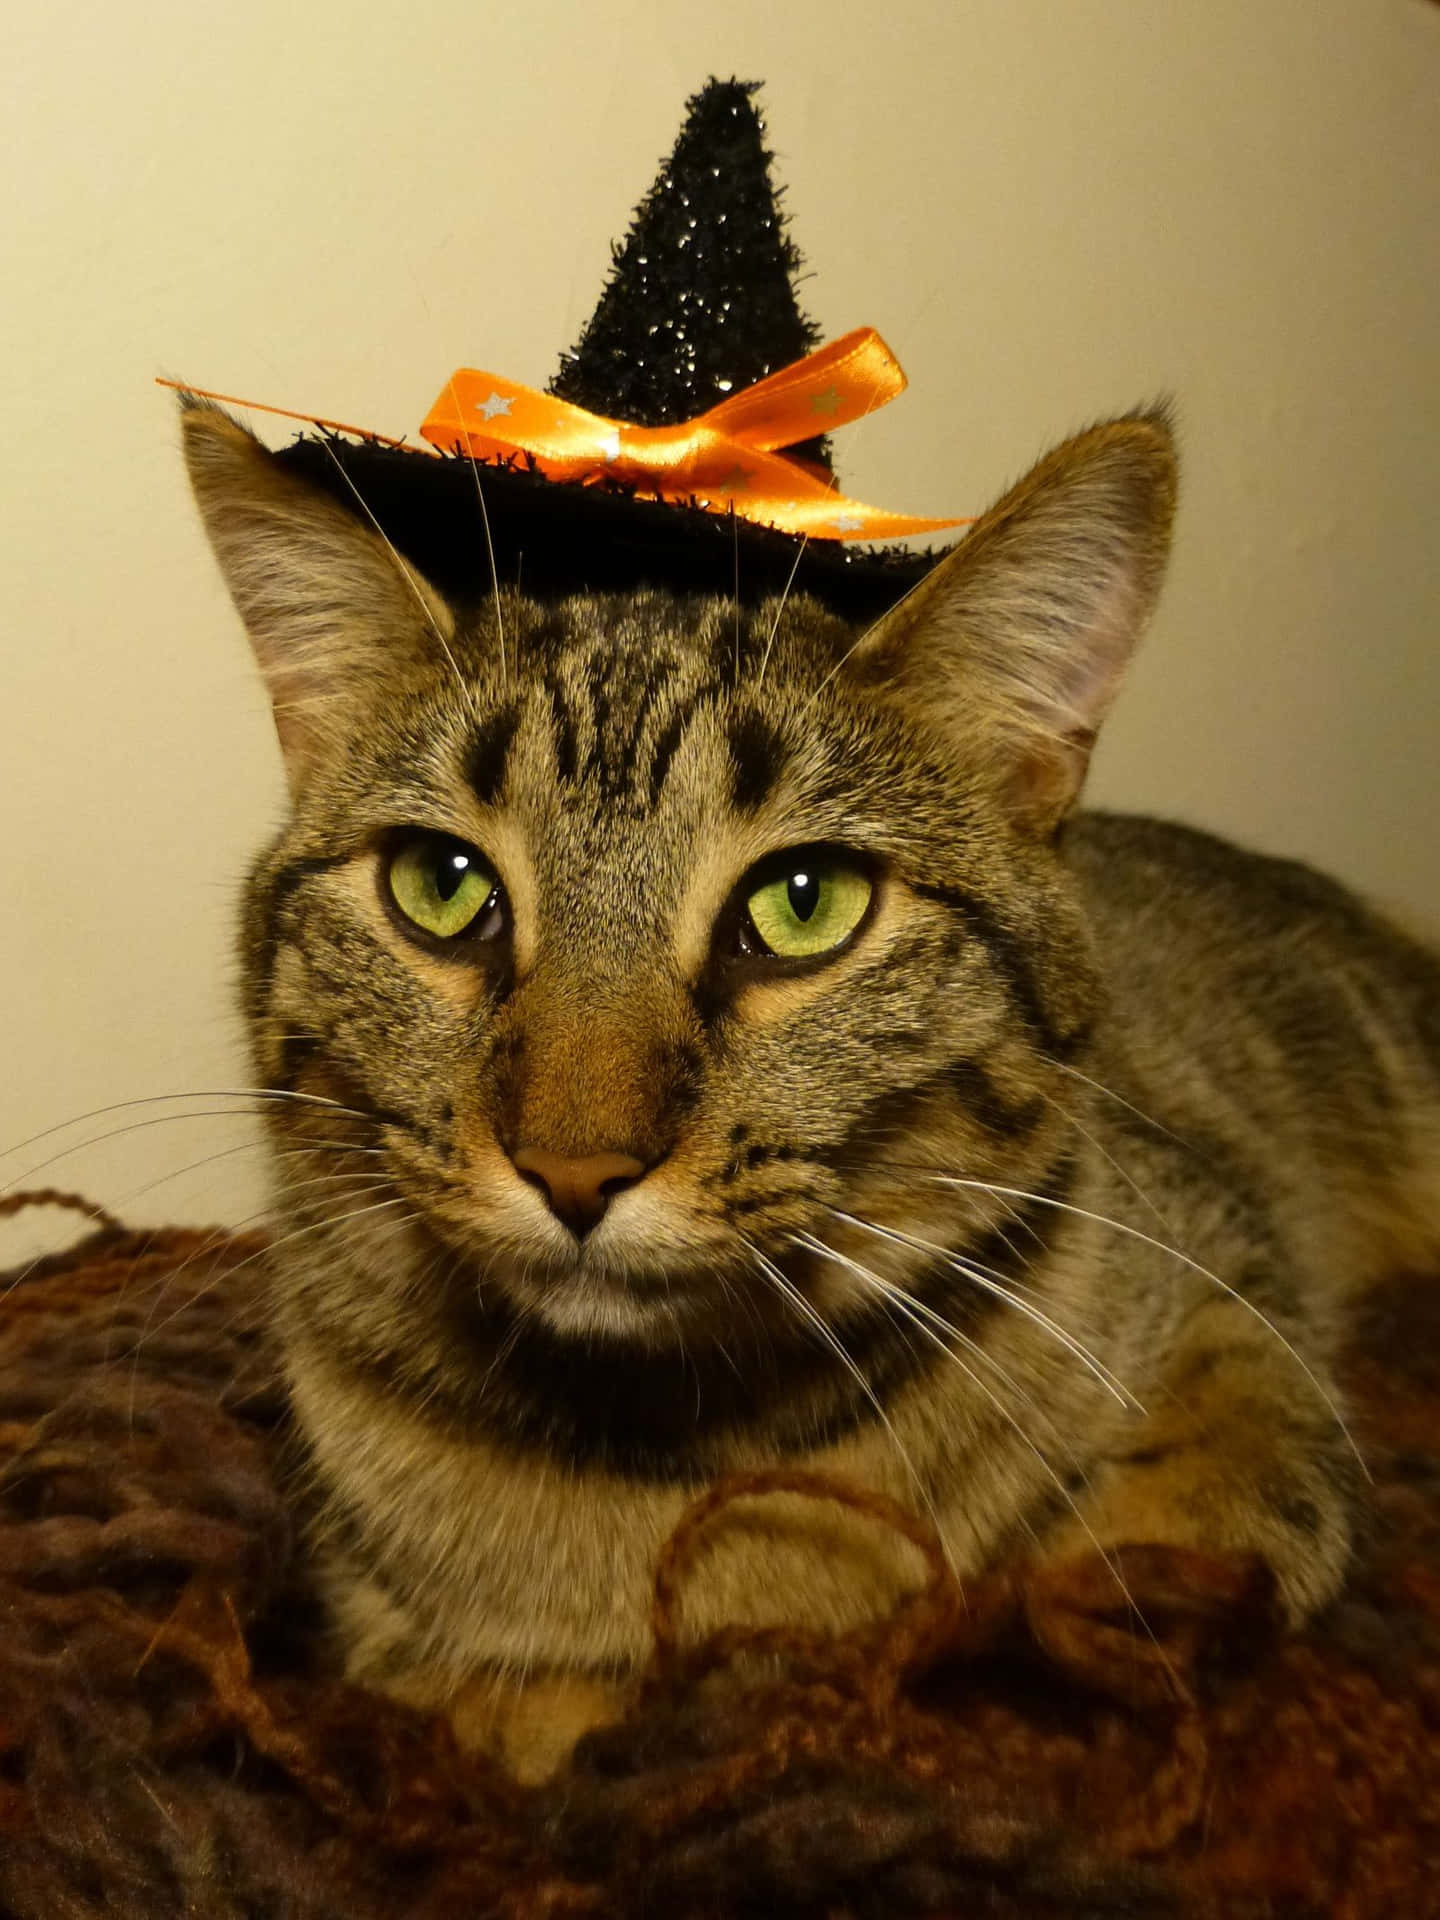 Get into the Halloween spirit with this spooky black cat!